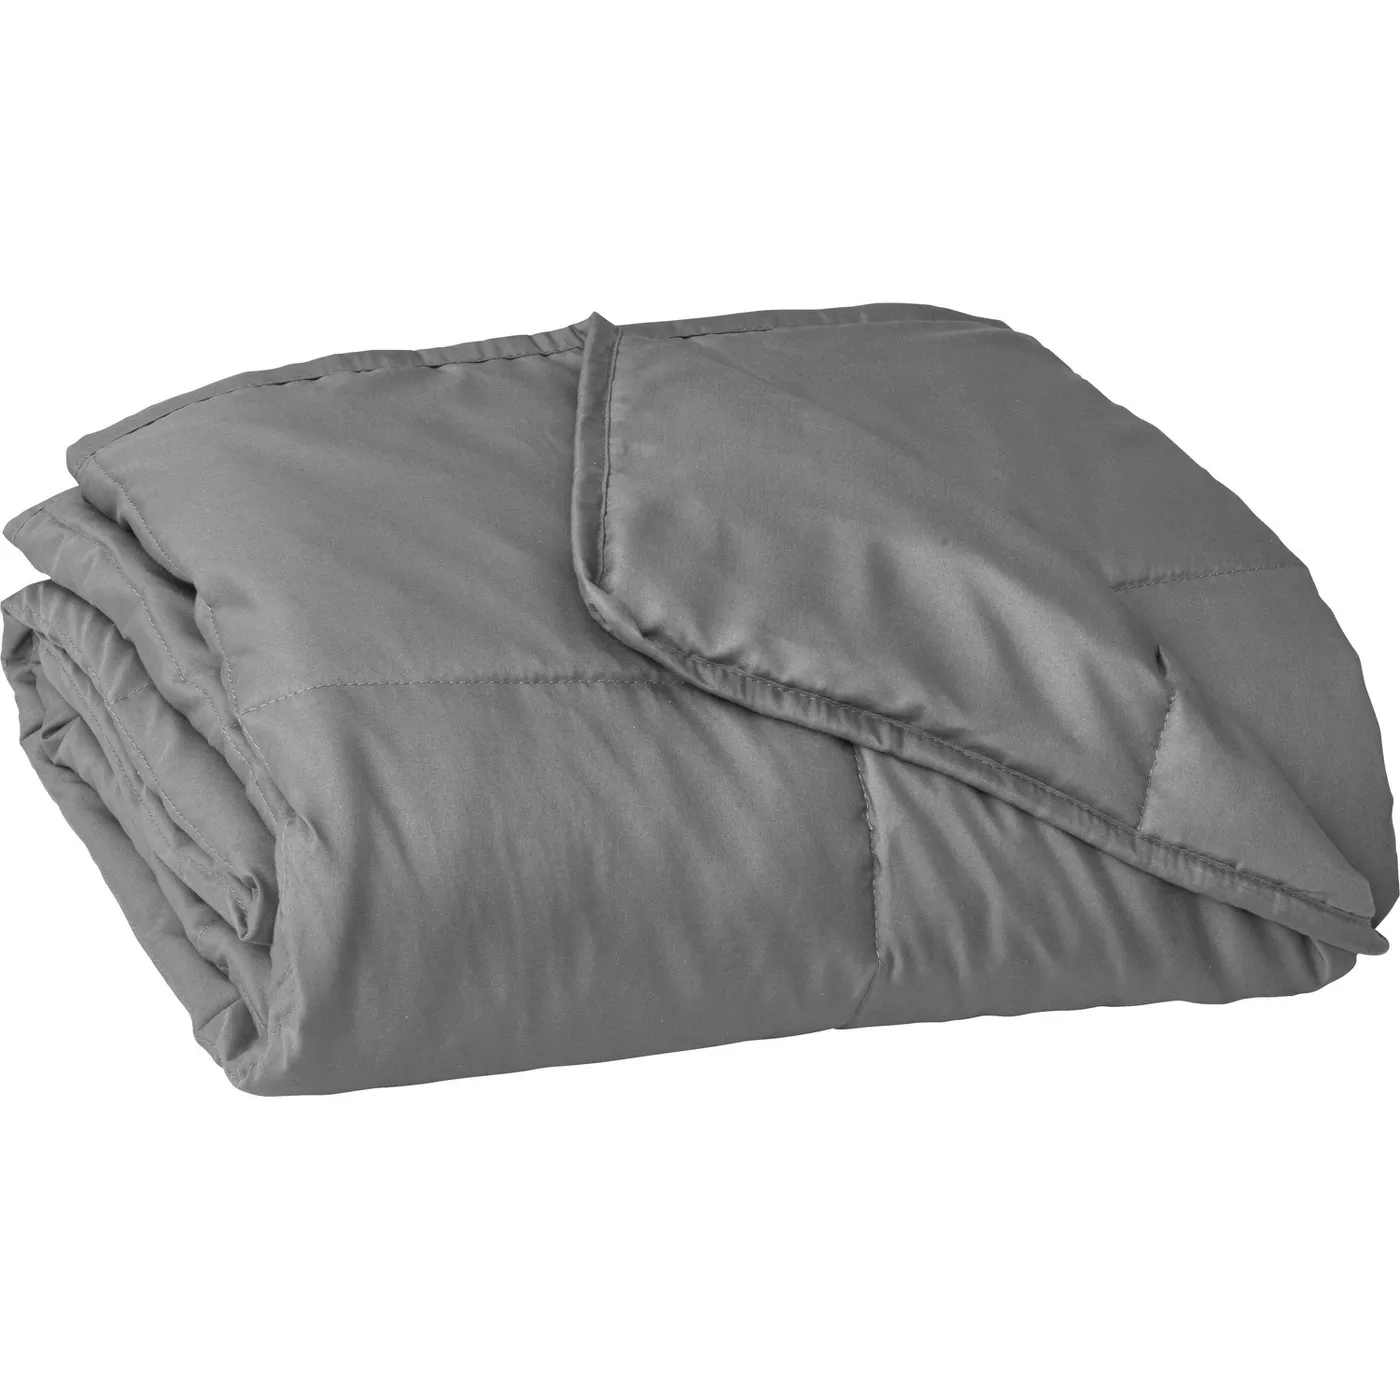 48" x 72" Essentials 12lbs Weighted Blanket Gray - Tranquility - image 1 of 3